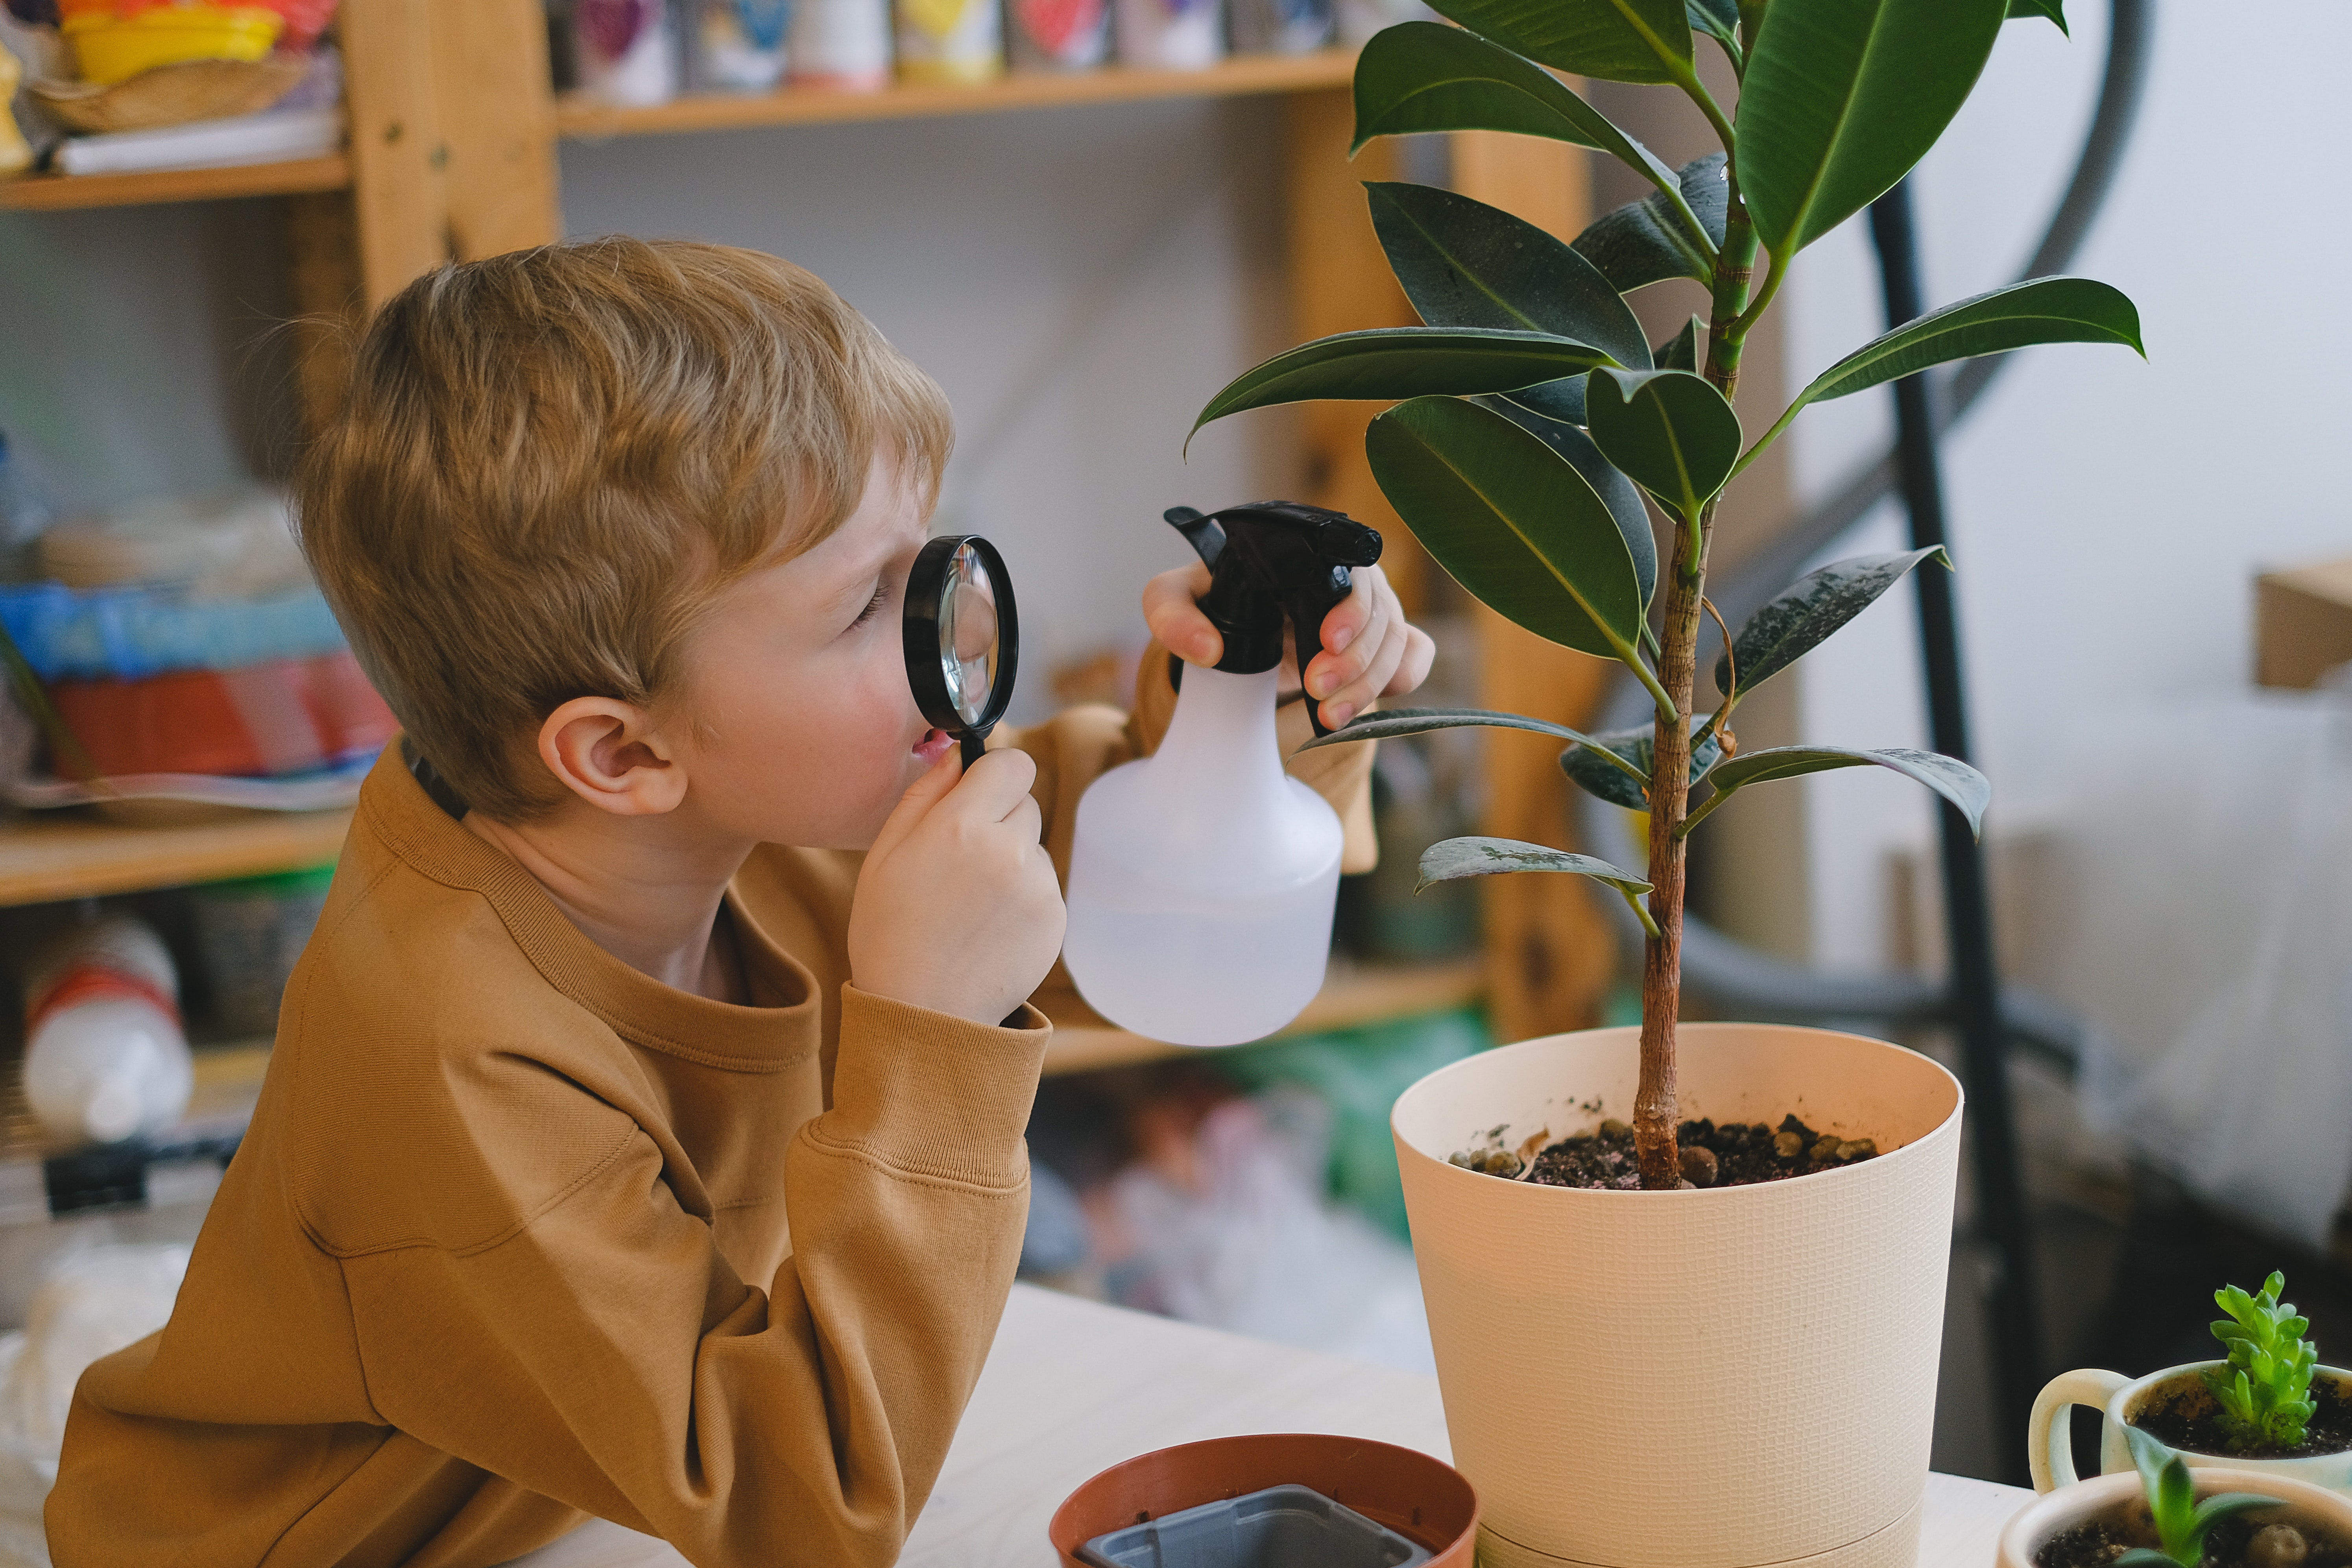 A child examines a plant